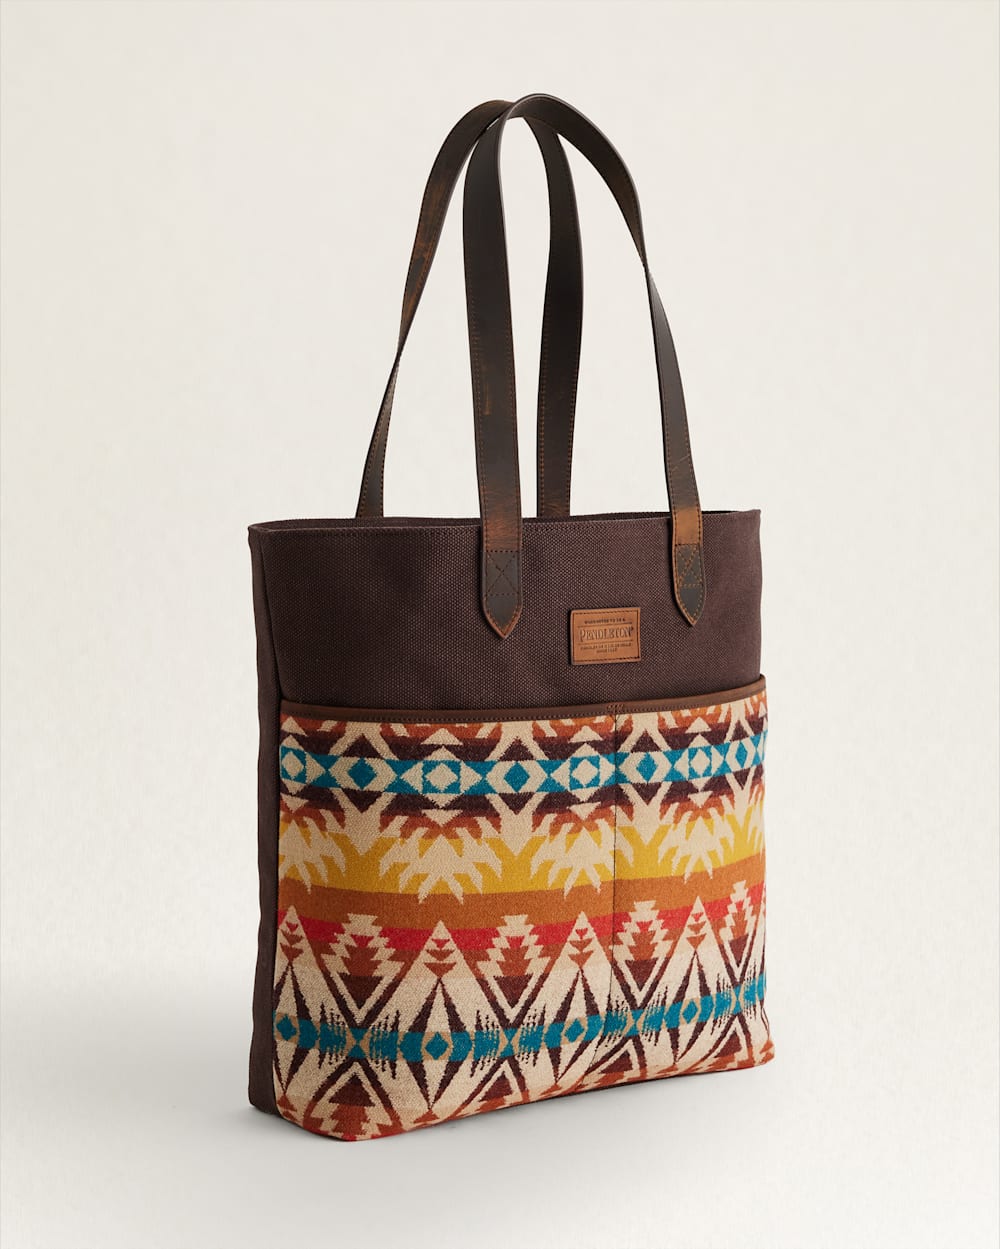 ALTERNATE VIEW OF PASCO WOOL/LEATHER MARKET TOTE IN SUNSET MULTI image number 2